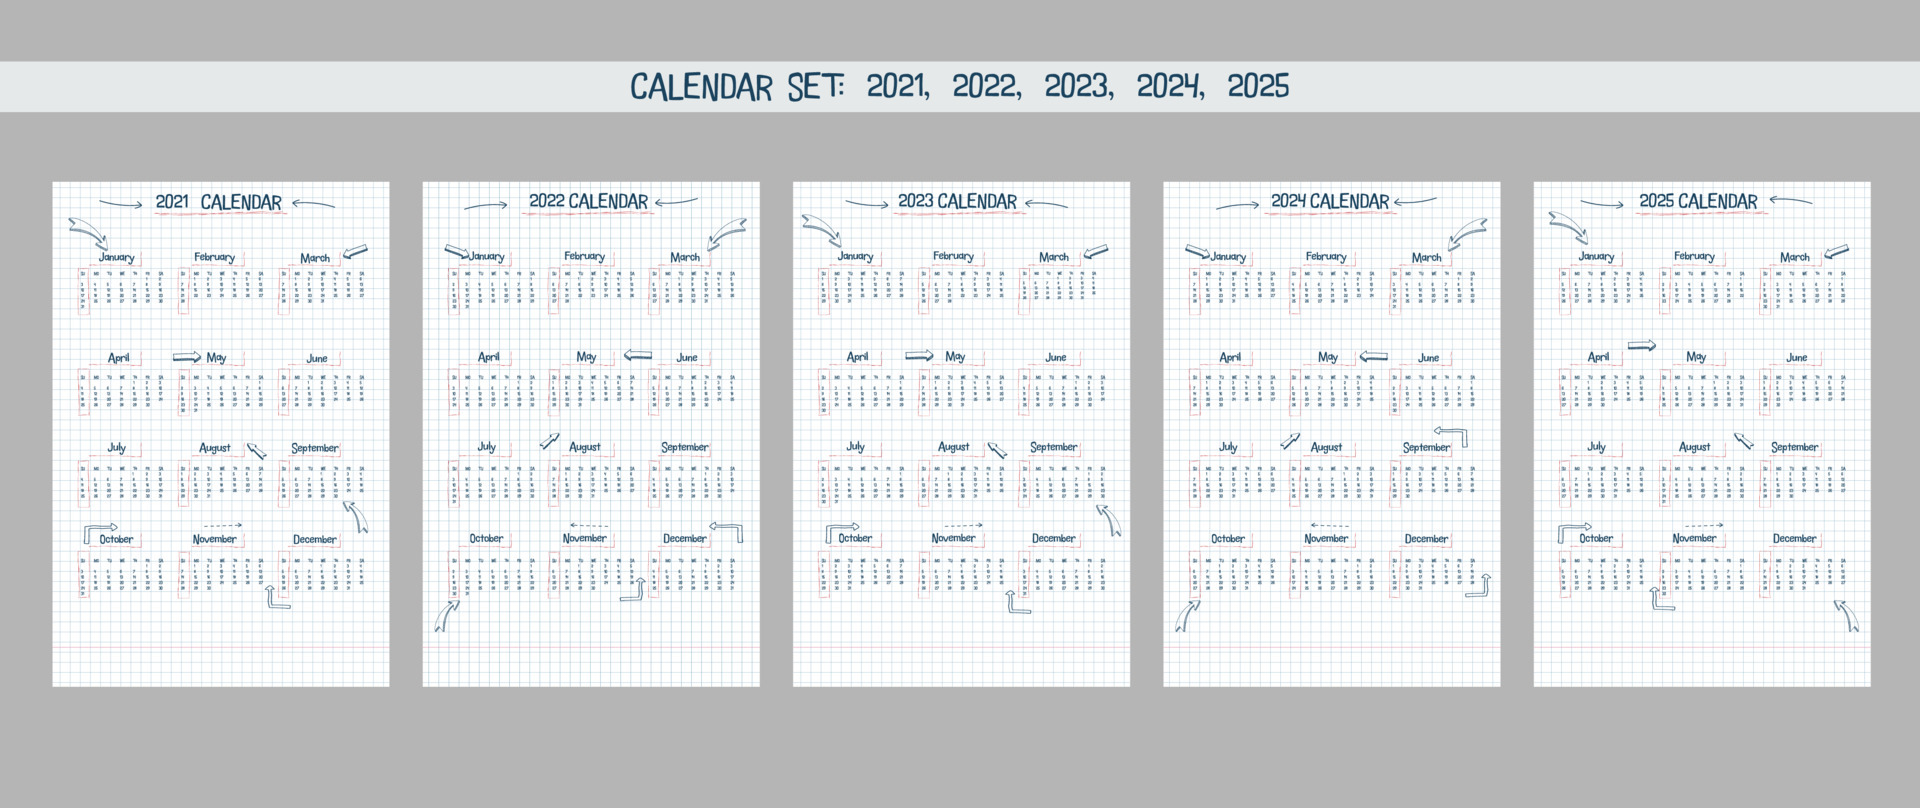 Scps Calender Customize and Print